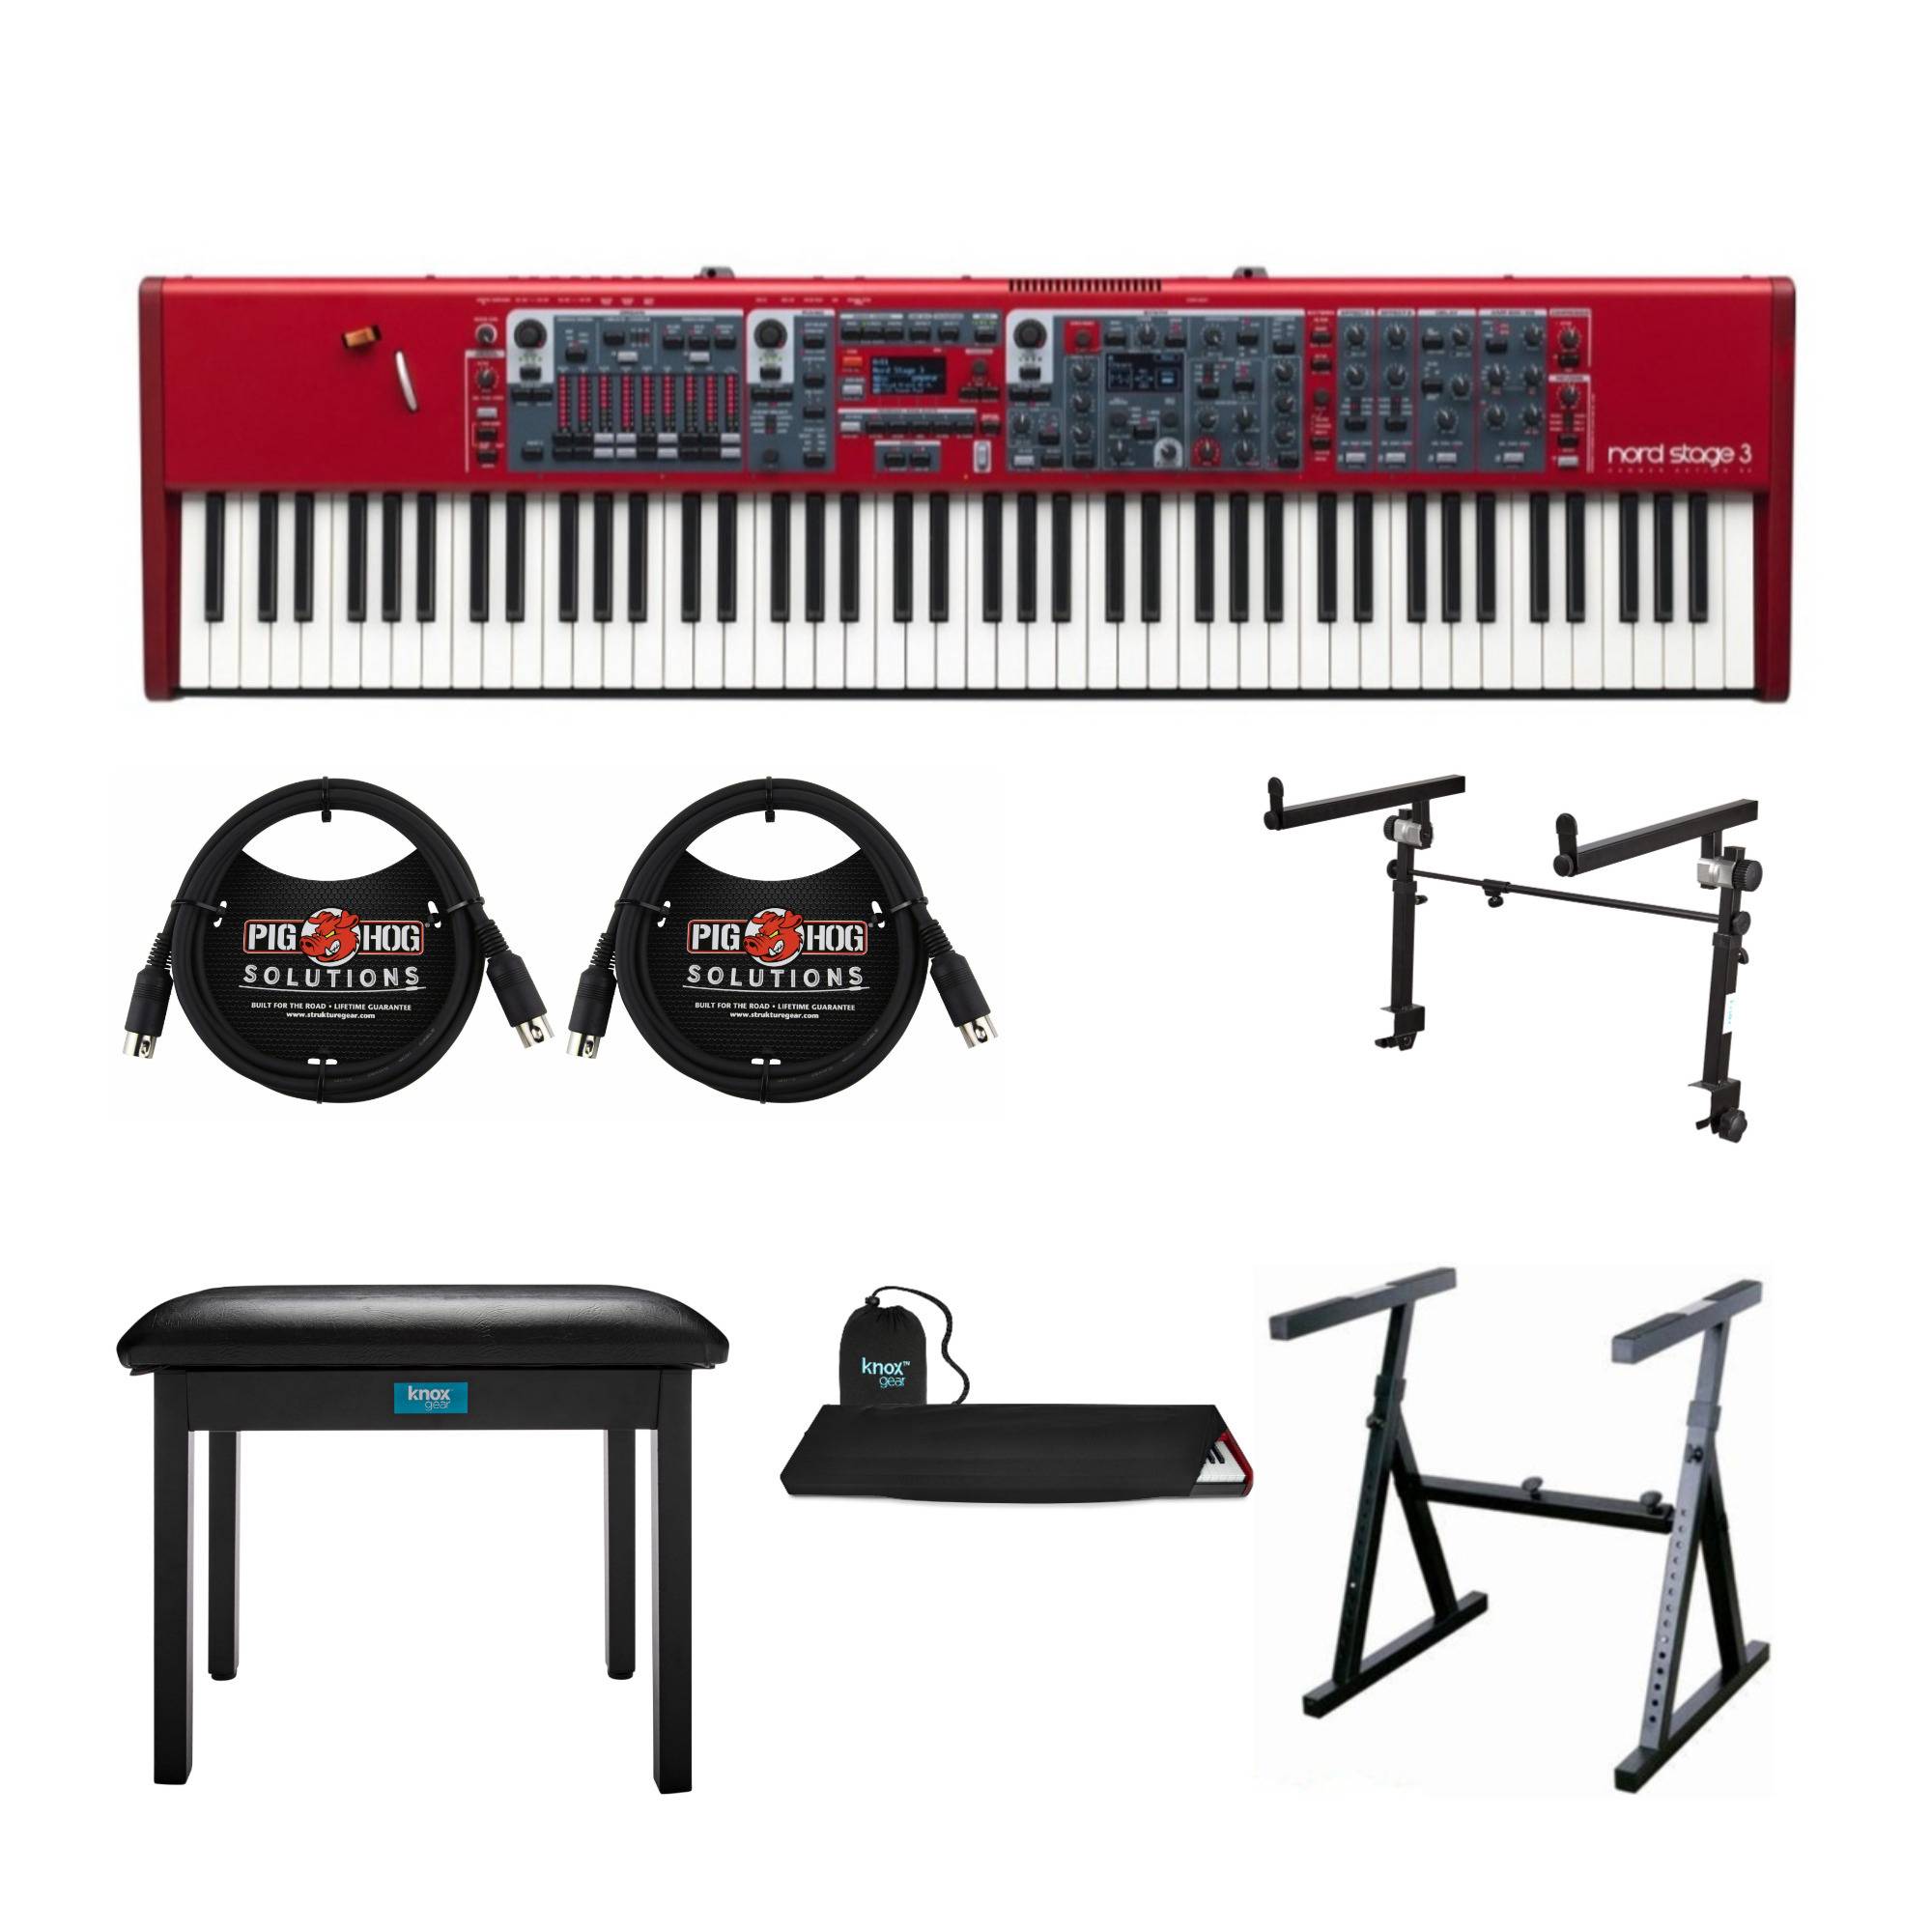 Nord Stage 3 88-Key Fully-Weighted Keyboard with Bench, Two-Tier Stand, Dust Cover and MIDI Cables